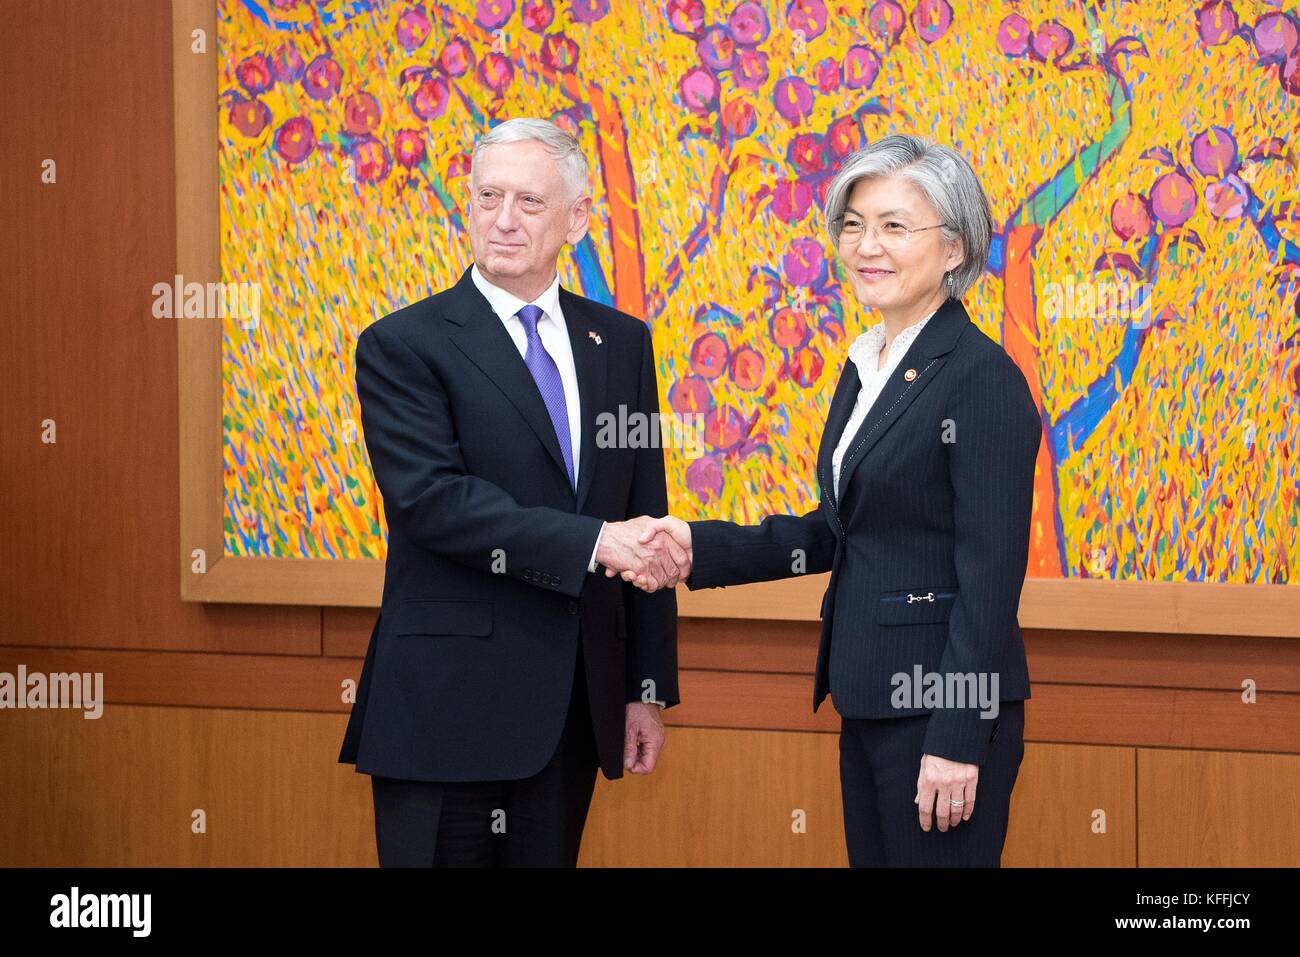 U.S. Secretary of Defense Jim Mattis, left, meets with South Korea Foreign Minister Kang Kyung-wha October 27, 2017 in Seoul, South Korea. Stock Photo